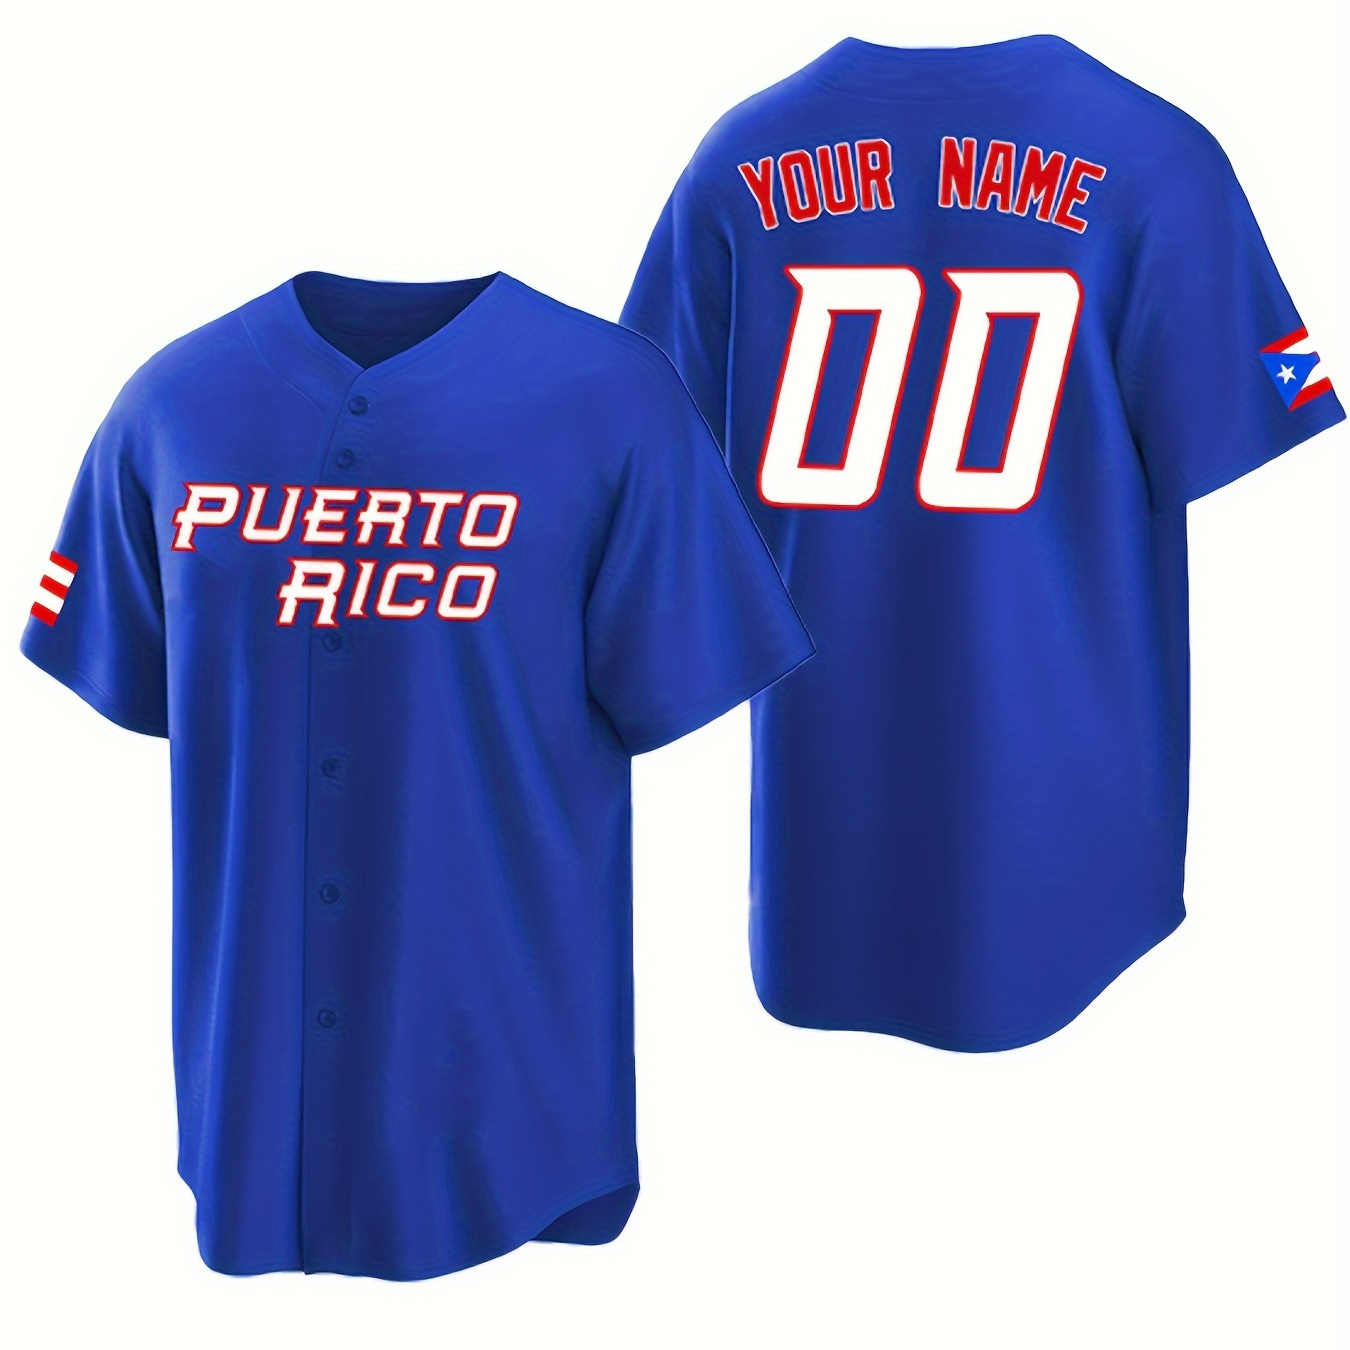 

Men's Personalized Custom Name & Numbers Baseball Jersey, Puerto Rico Graphic Print Baseball Jersey Shirt, Competition Party Training Button Up Shirt, Leisure Sports Personalized Clothing